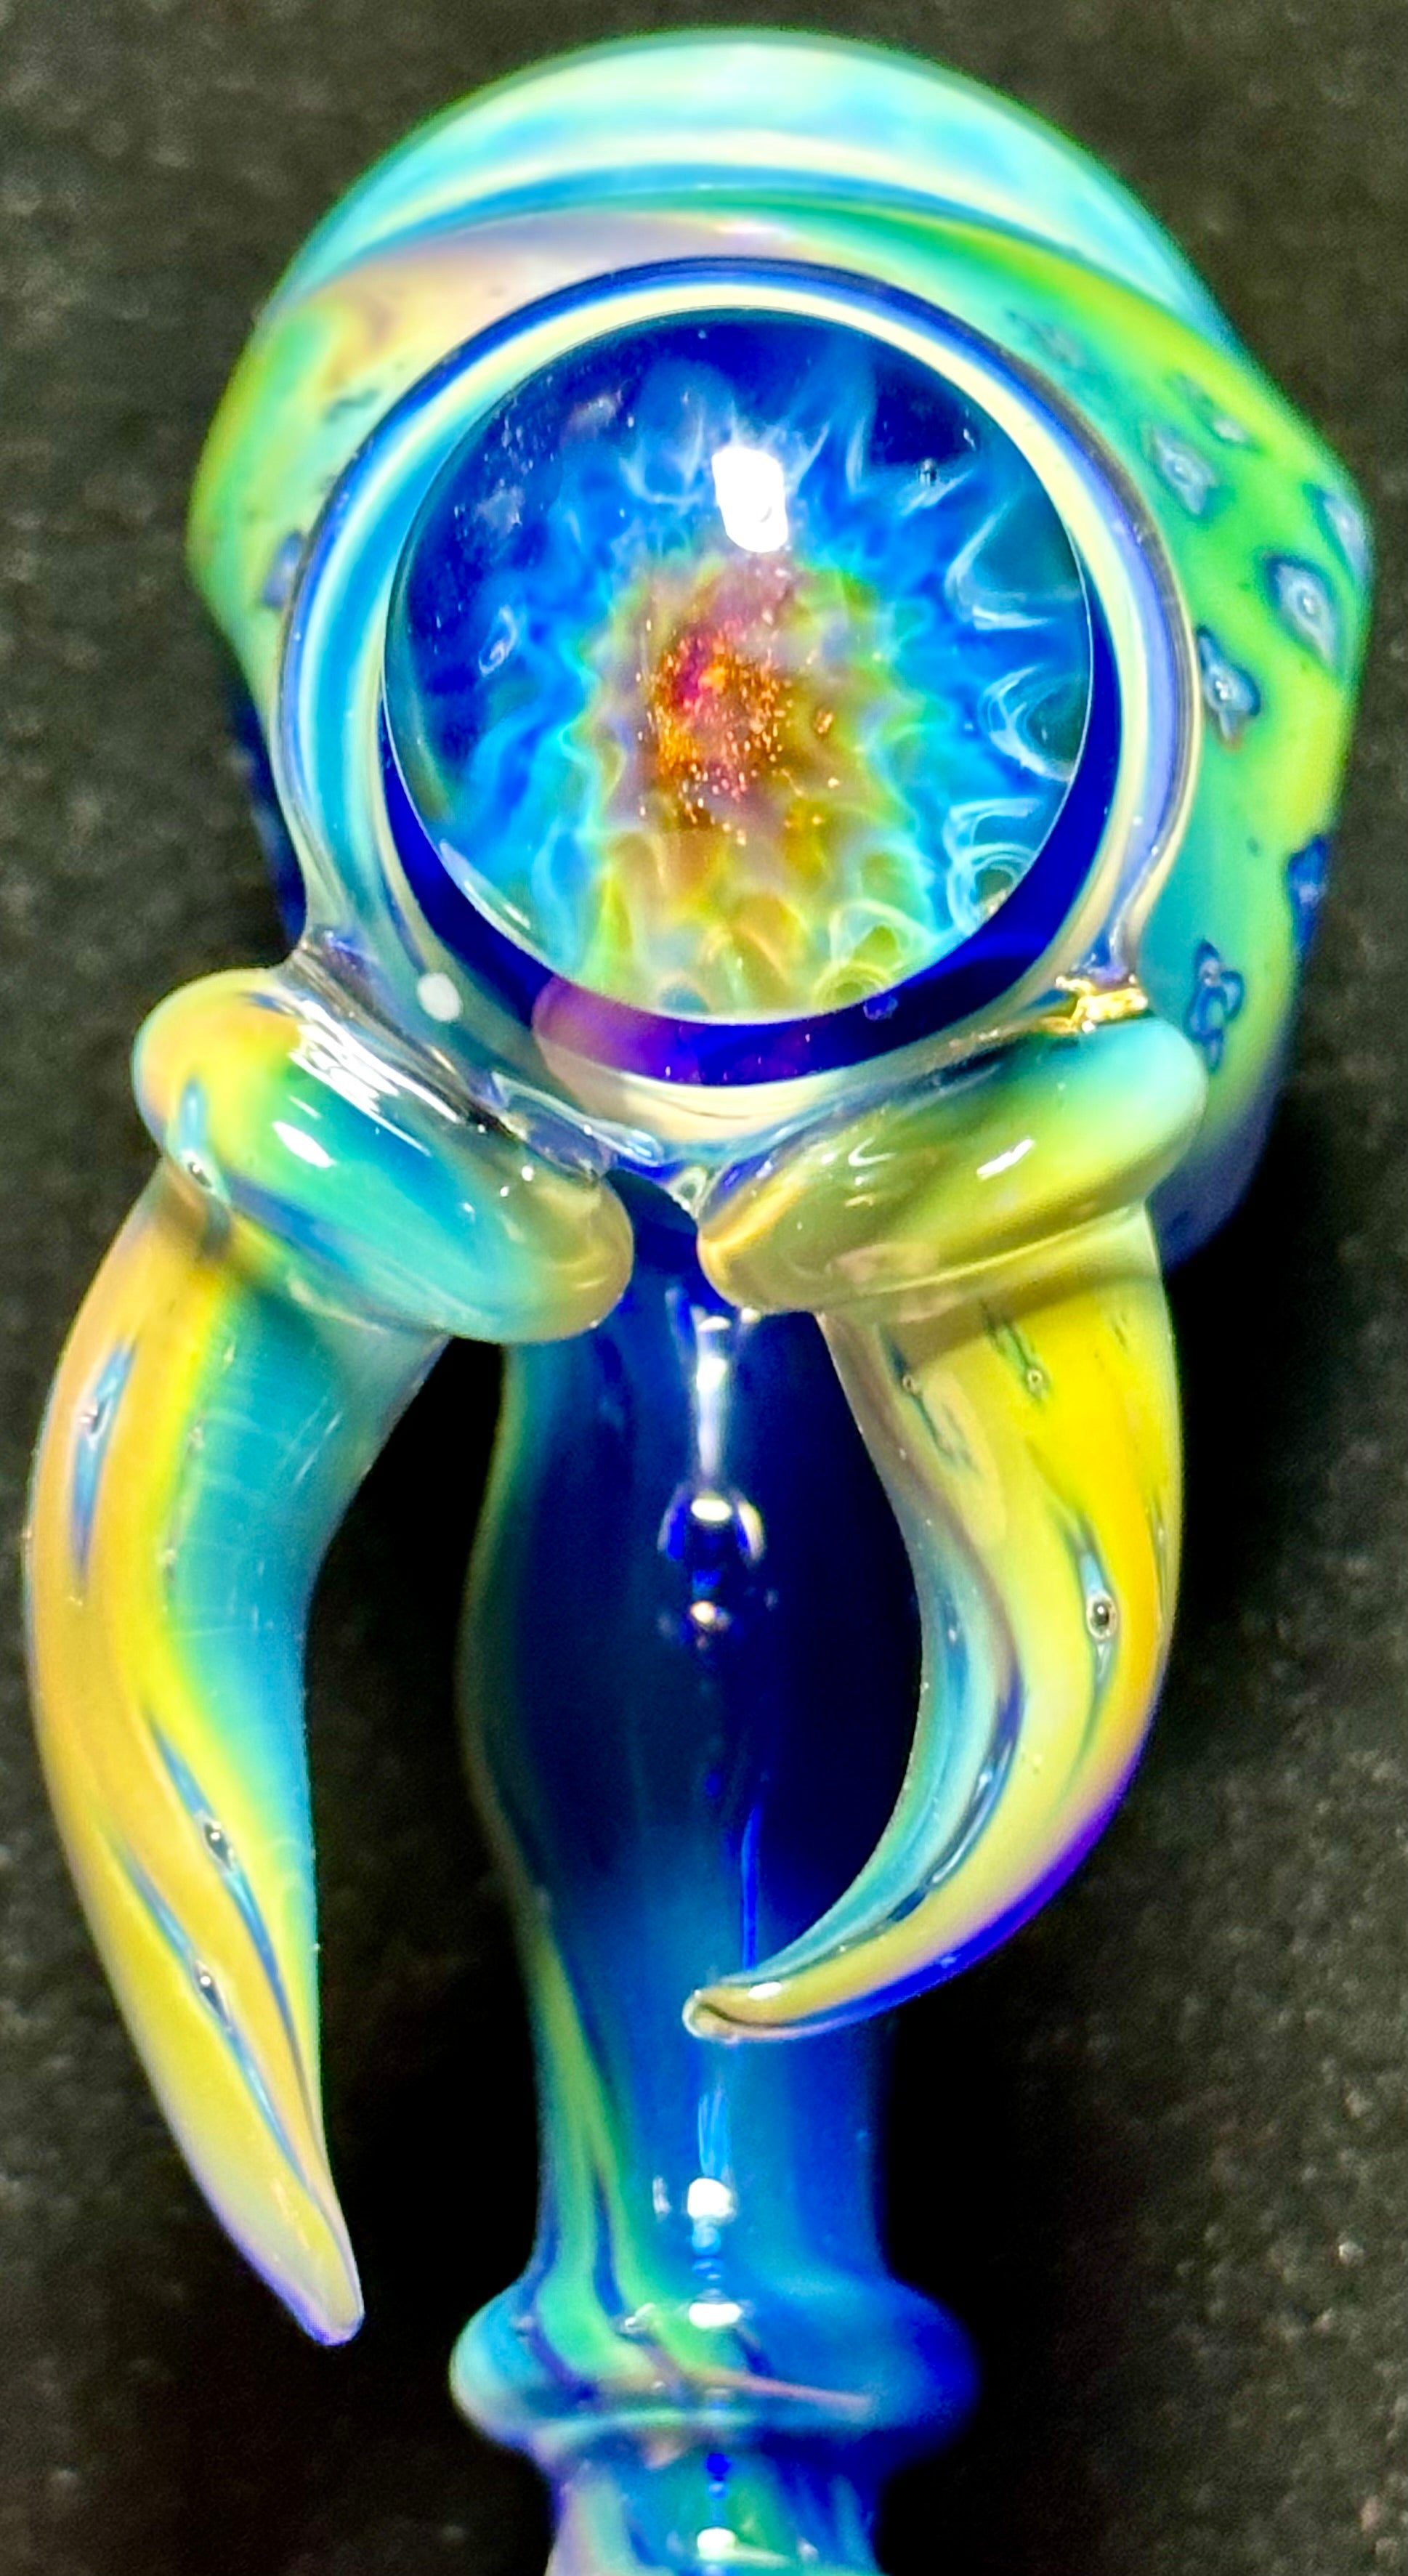 Fearn Gully Bubbletrap Fumed Honeycomb with Mibs & Talons Spoon